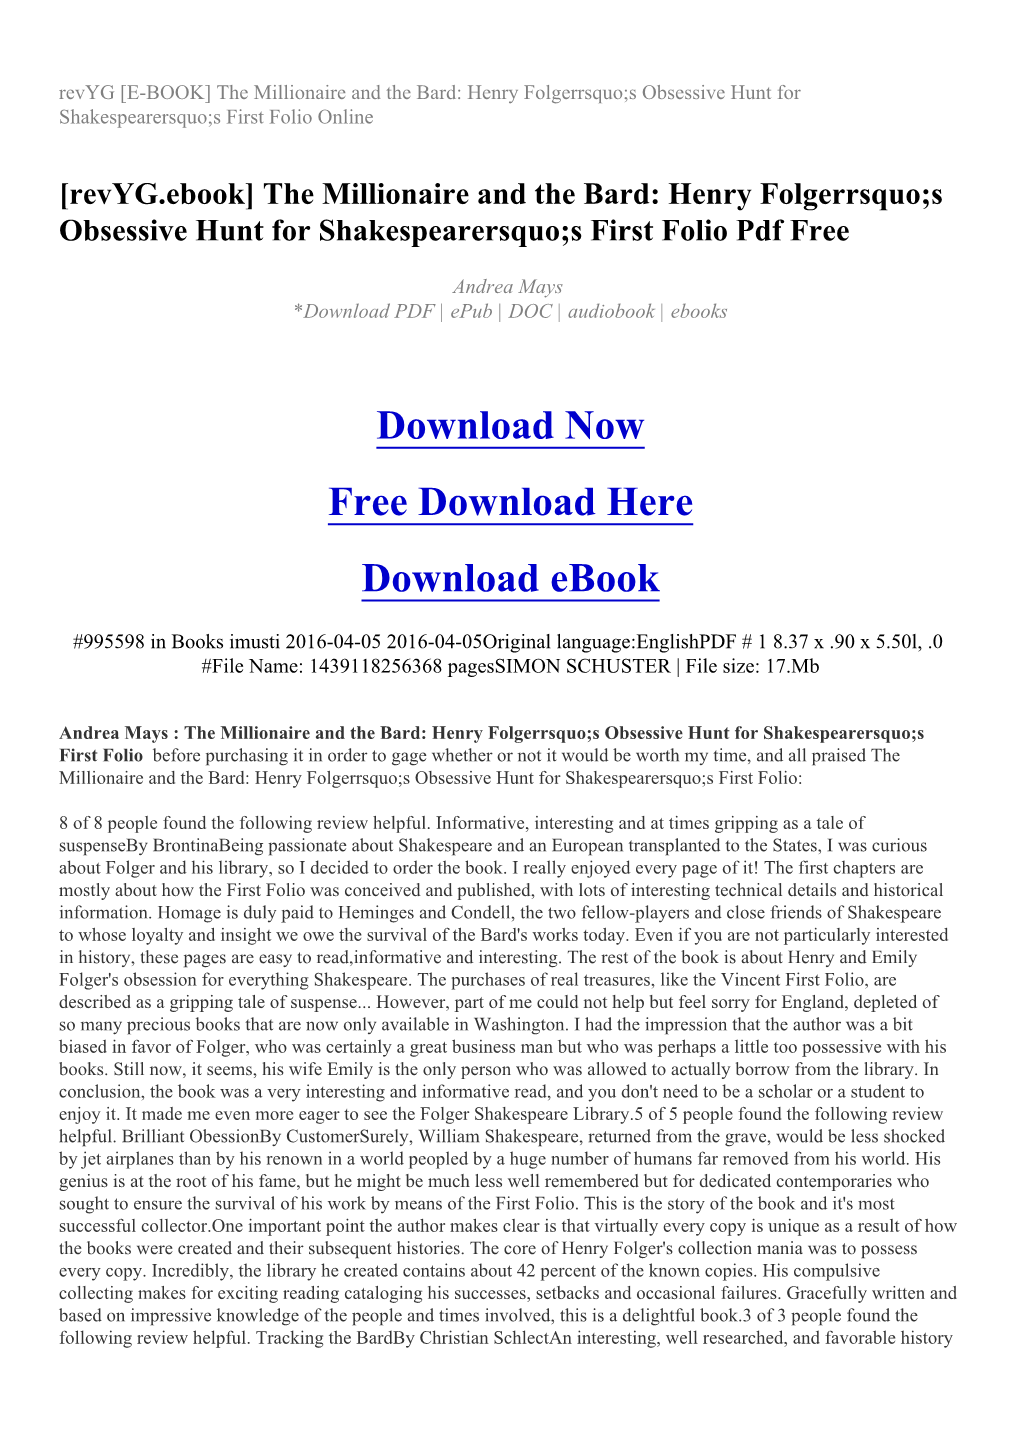 The Millionaire and the Bard: Henry Folgerrsquo;S Obsessive Hunt for Shakespearersquo;S First Folio Online